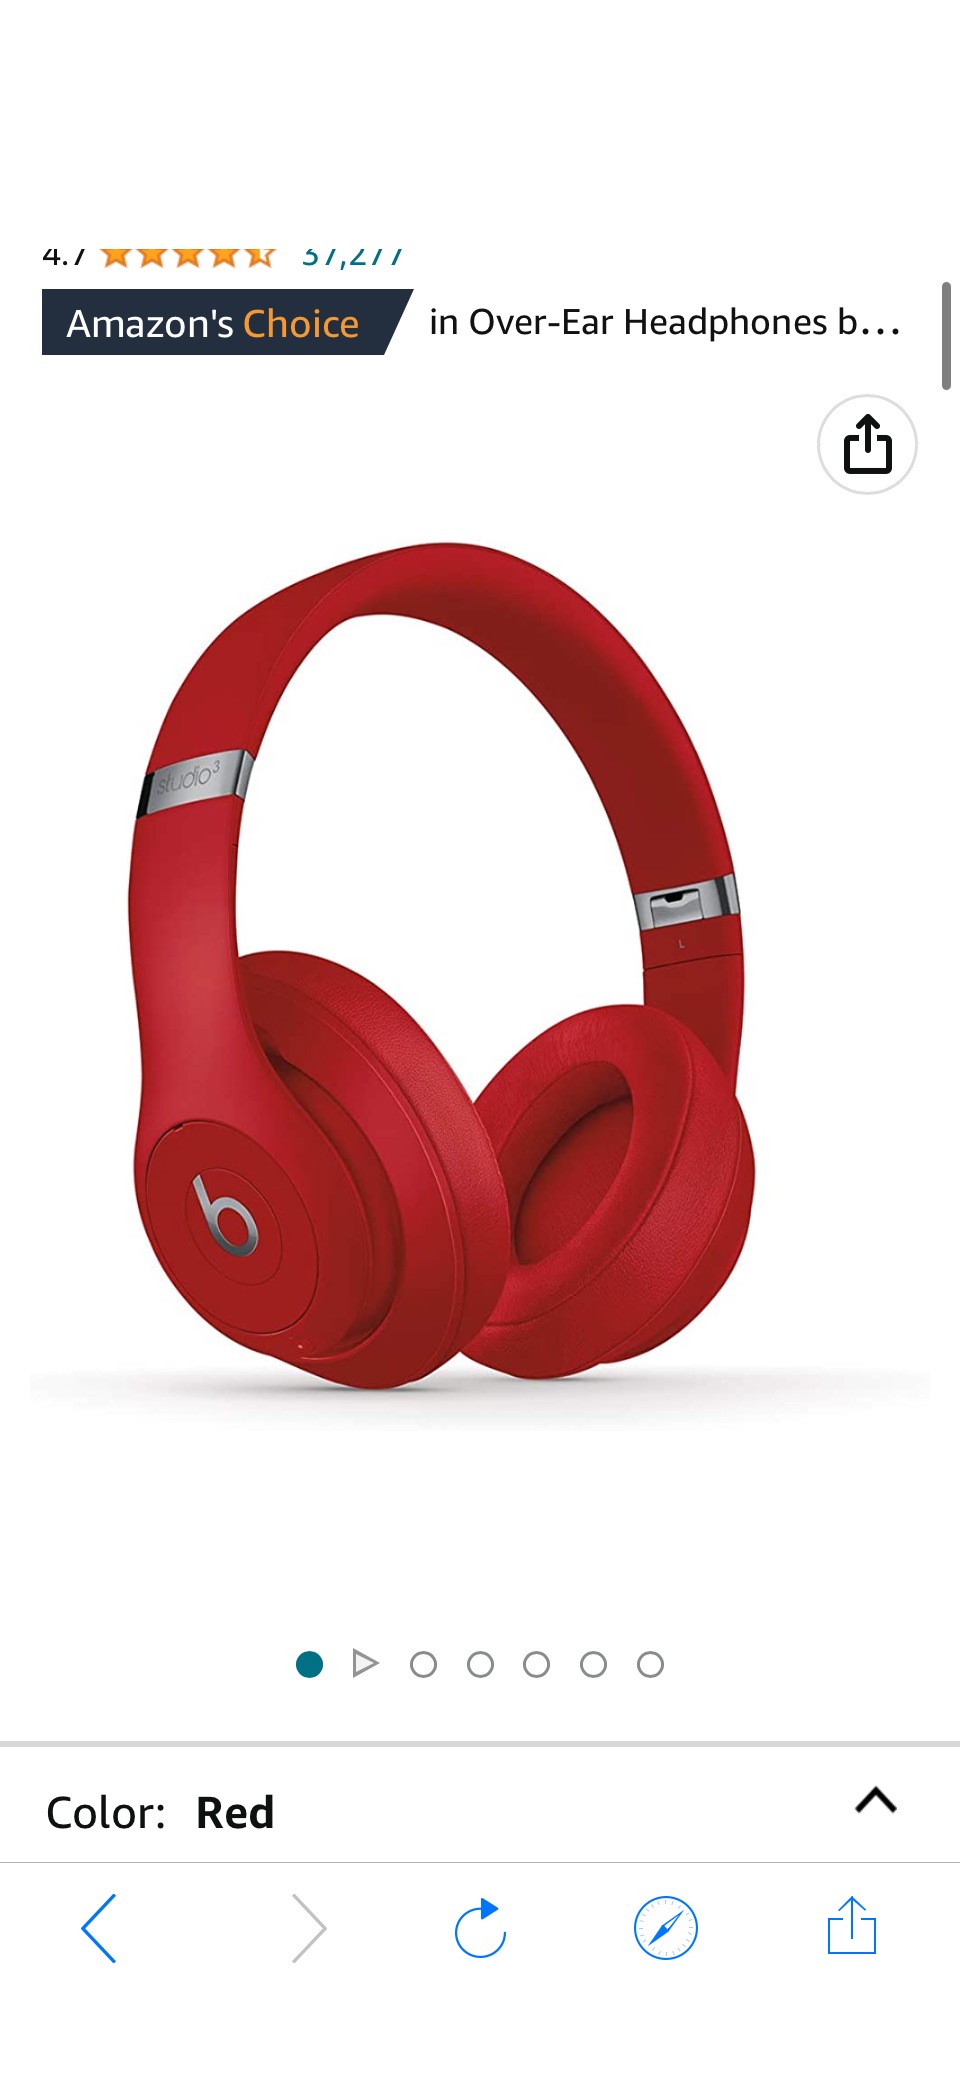 Amazon.com: Beats Studio3 Wireless Noise Cancelling Over-Ear Headphones - Apple W1 Headphone Chip, Class 1 Bluetooth, 22 Hours of Listening Time, Built-in Microphone - Red (Latest Model) : Electronics原价349.95